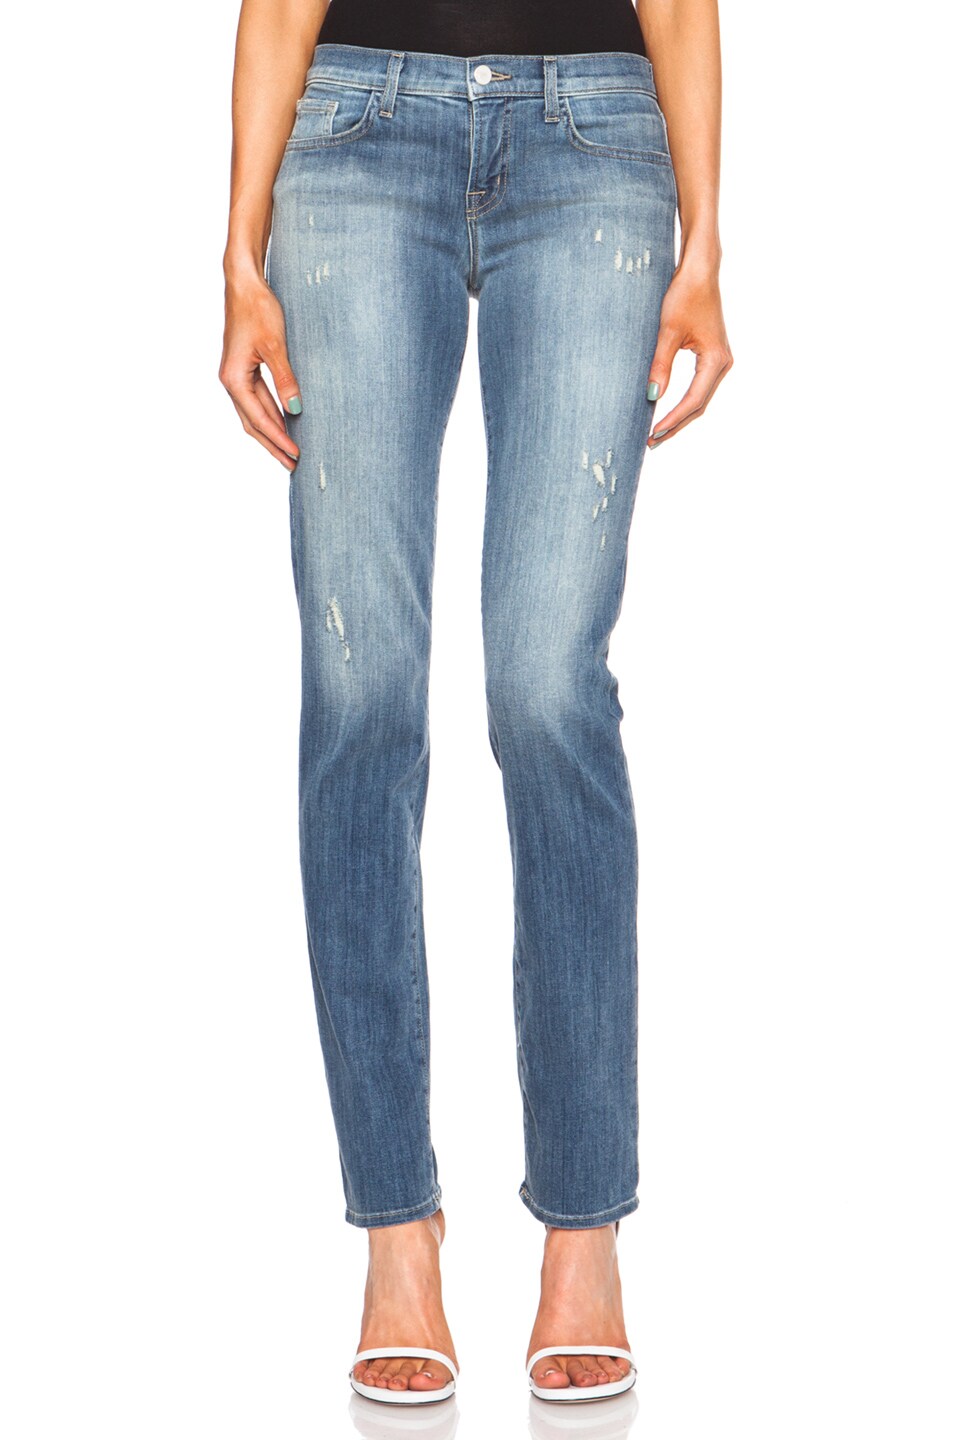 Image 1 of J Brand Jude Midrise Skinny in Mesmerize